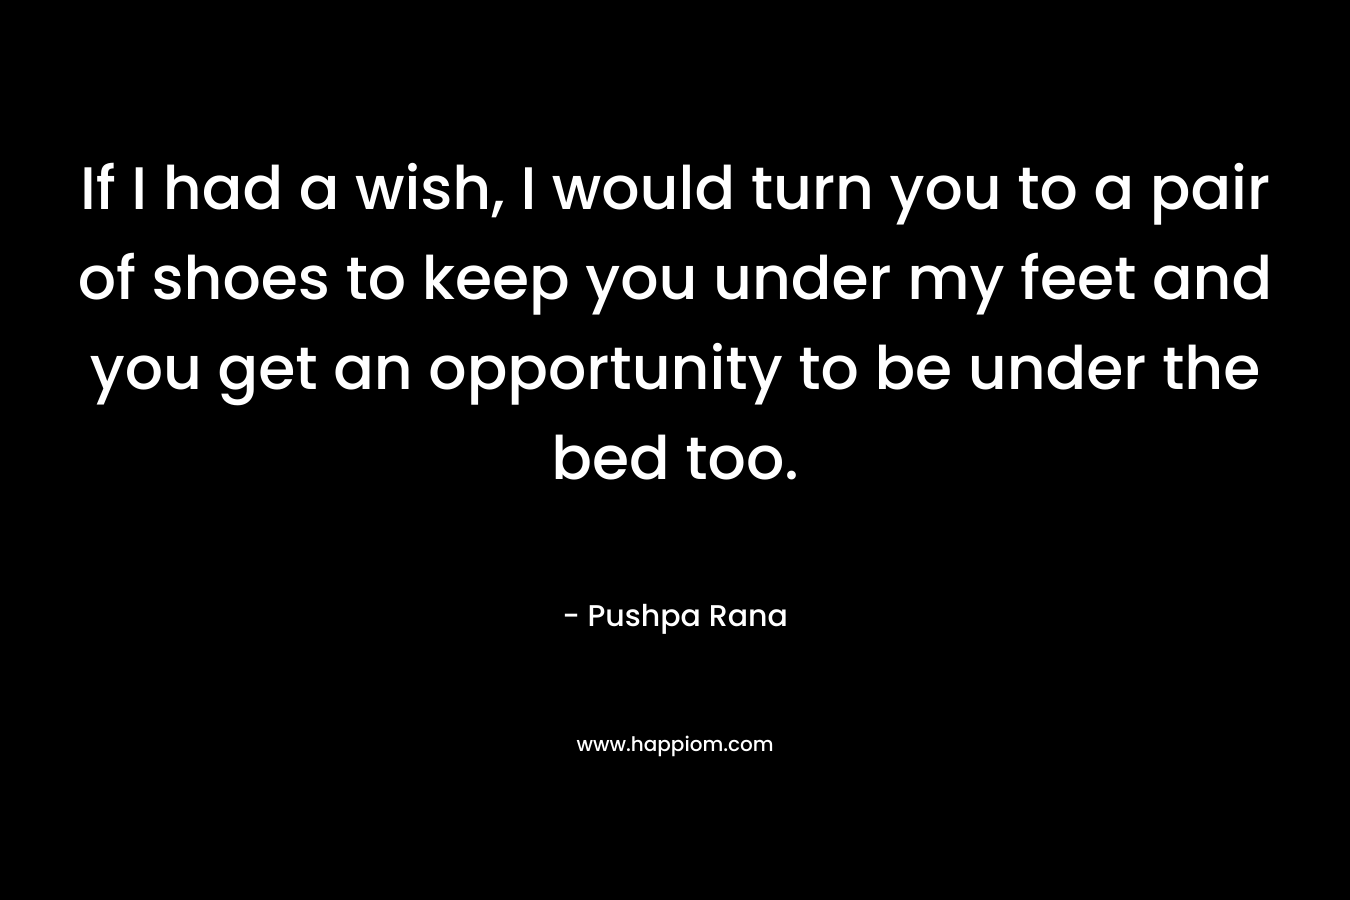 If I had a wish, I would turn you to a pair of shoes to keep you under my feet and you get an opportunity to be under the bed too. – Pushpa Rana